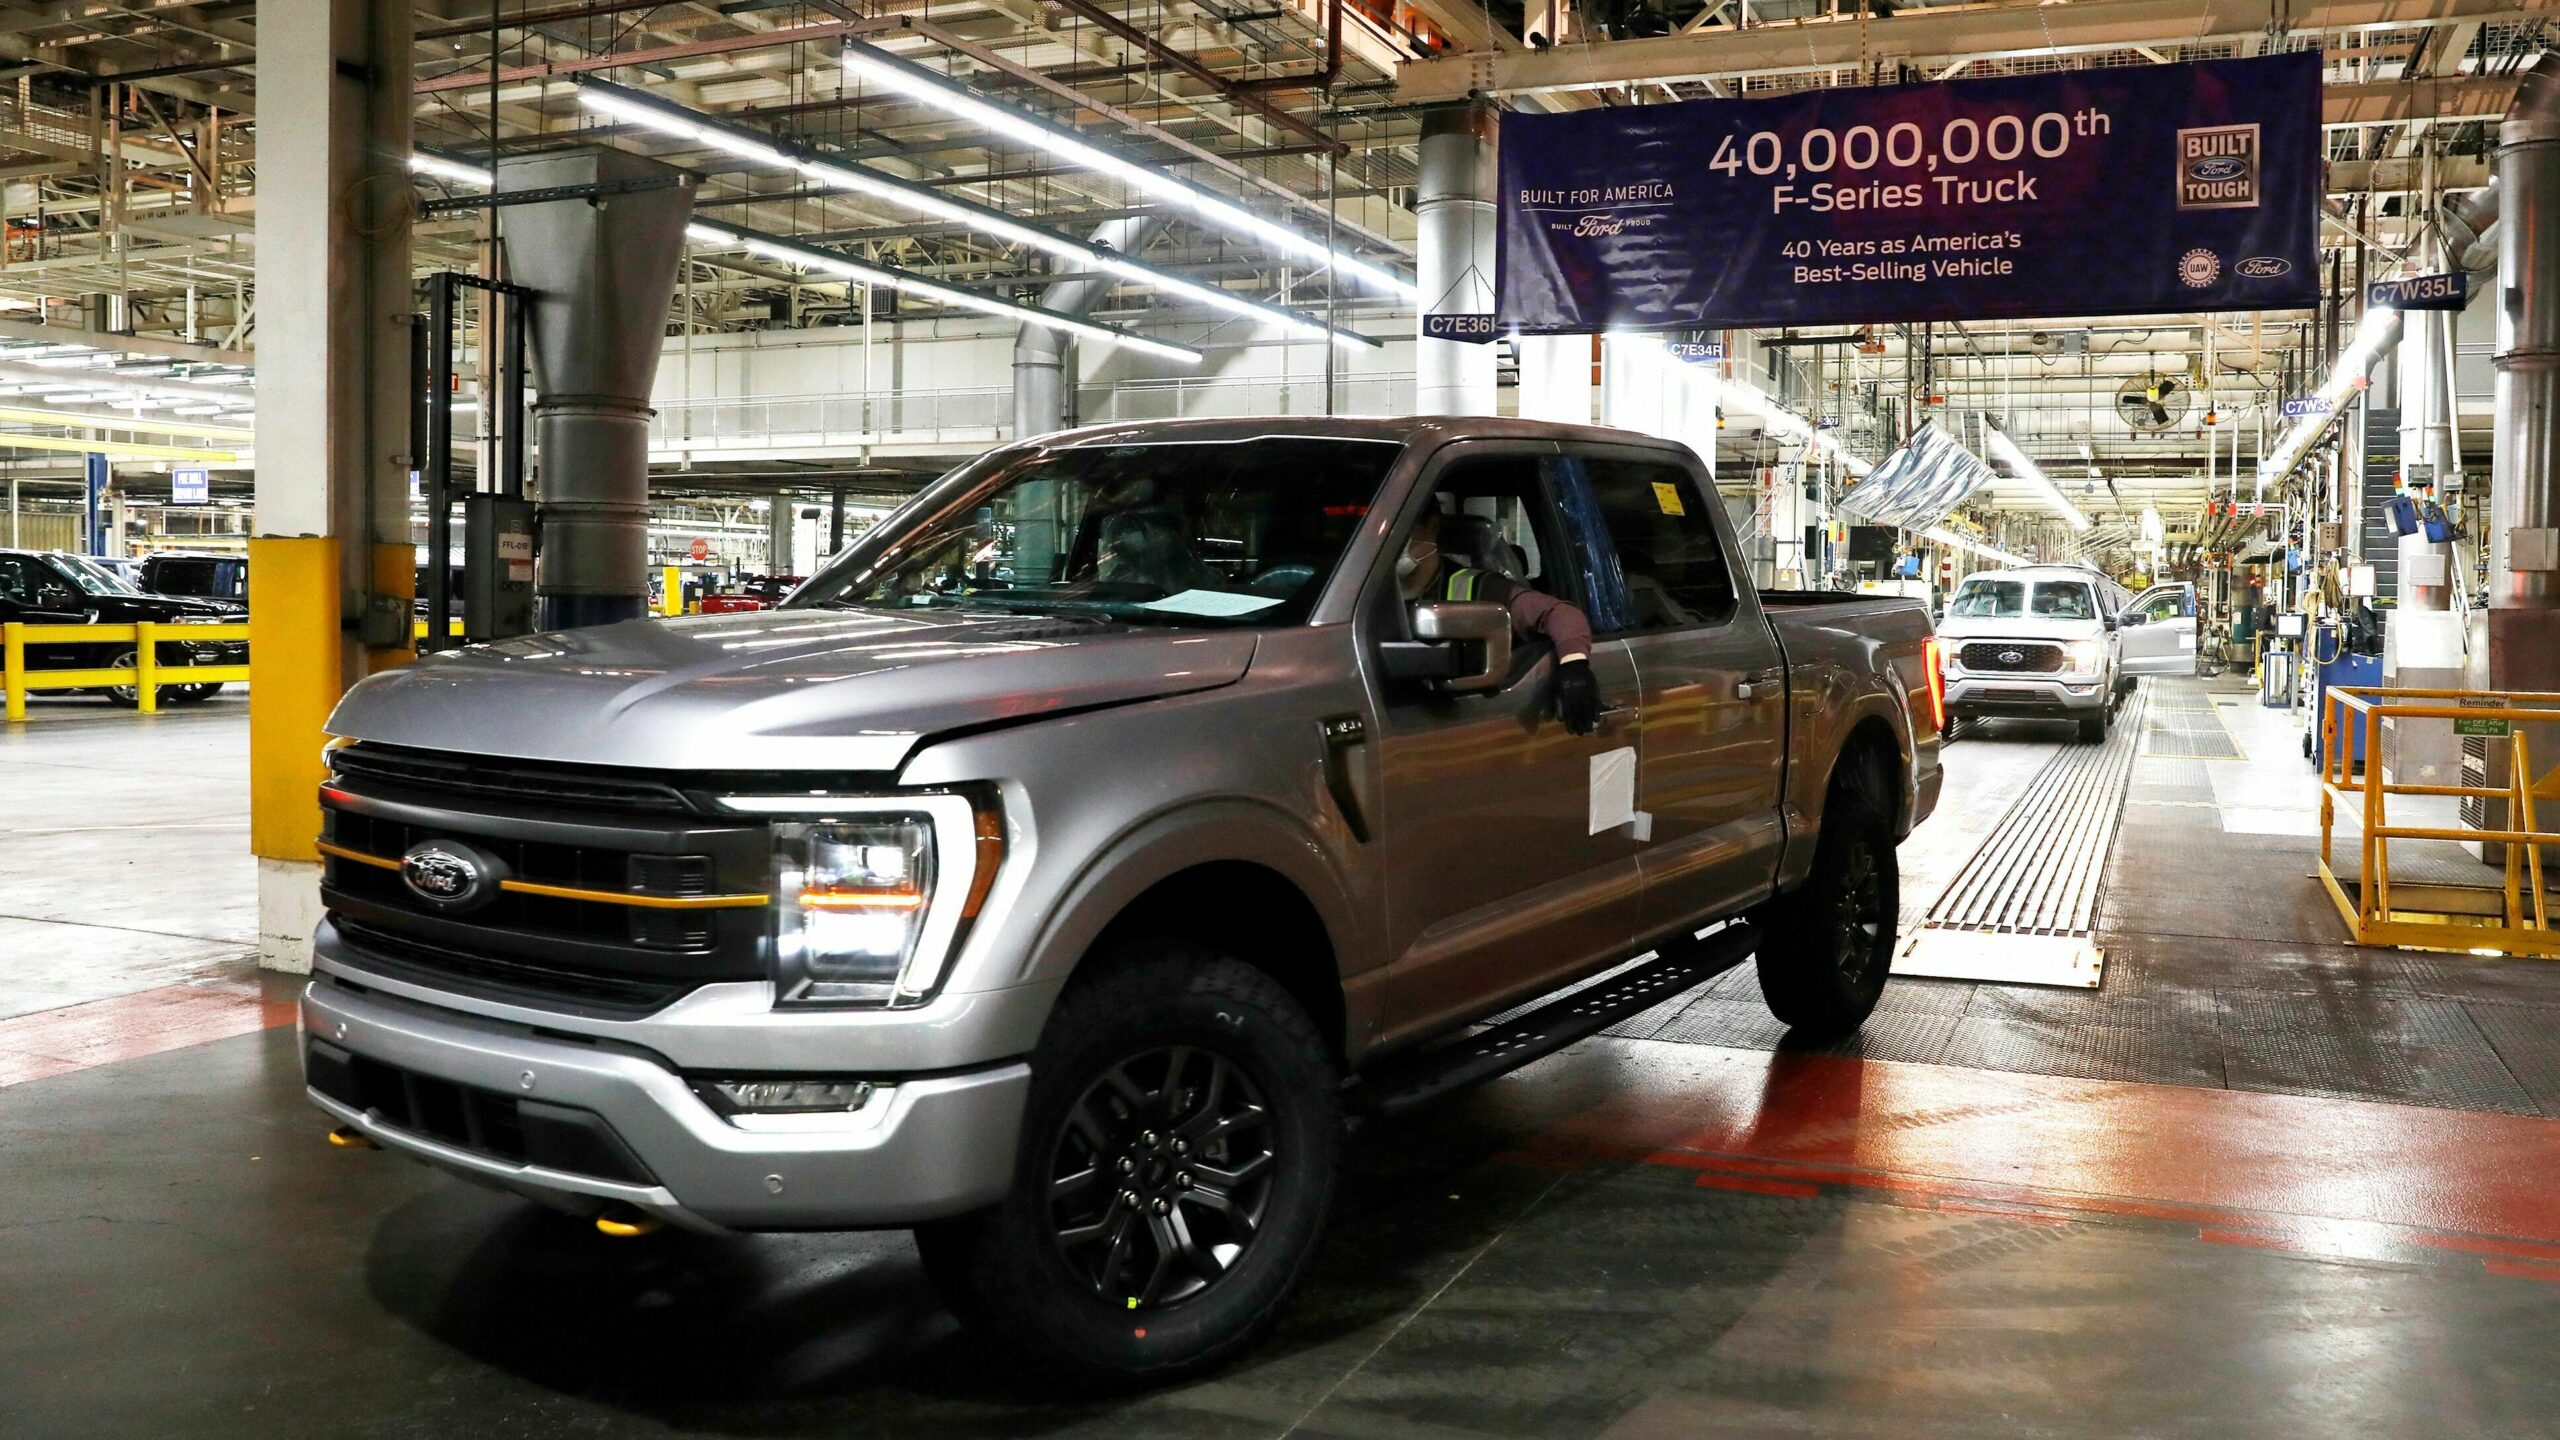 Ford is recalling more than 112,000 F-150 trucks that could roll away while parked